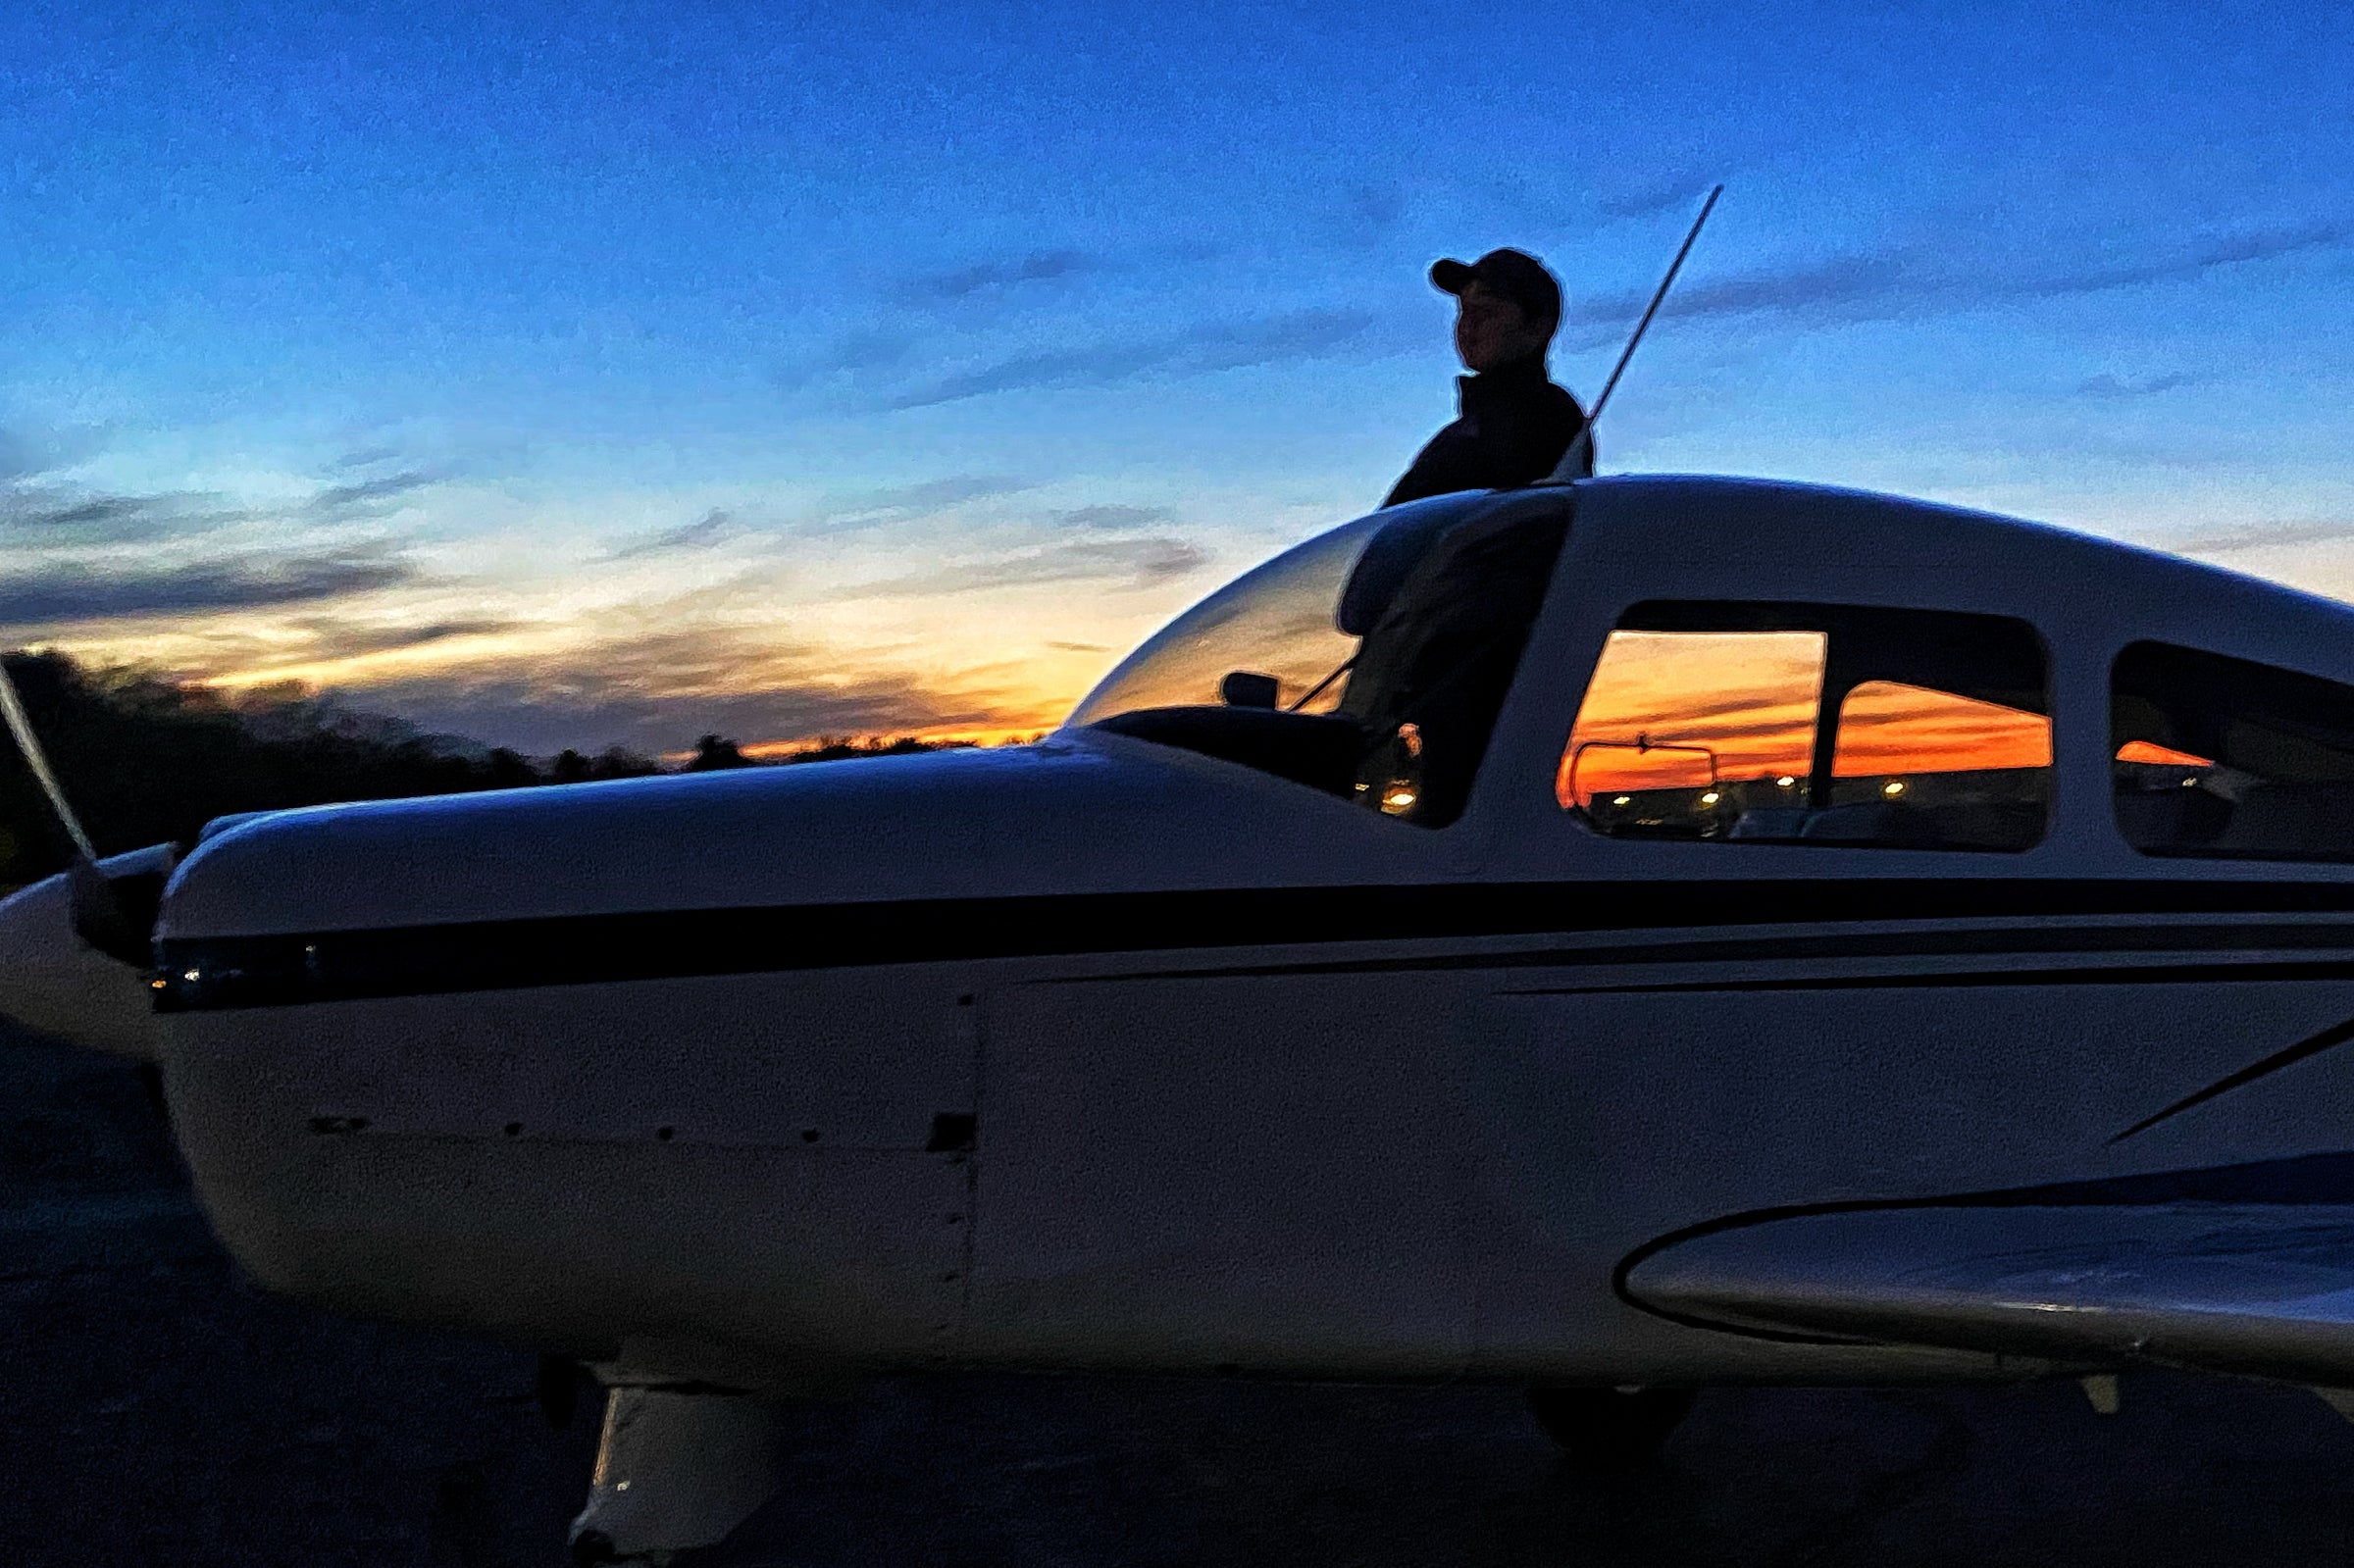 Teen pilot standing on wing of parked single engine plane at sunset.